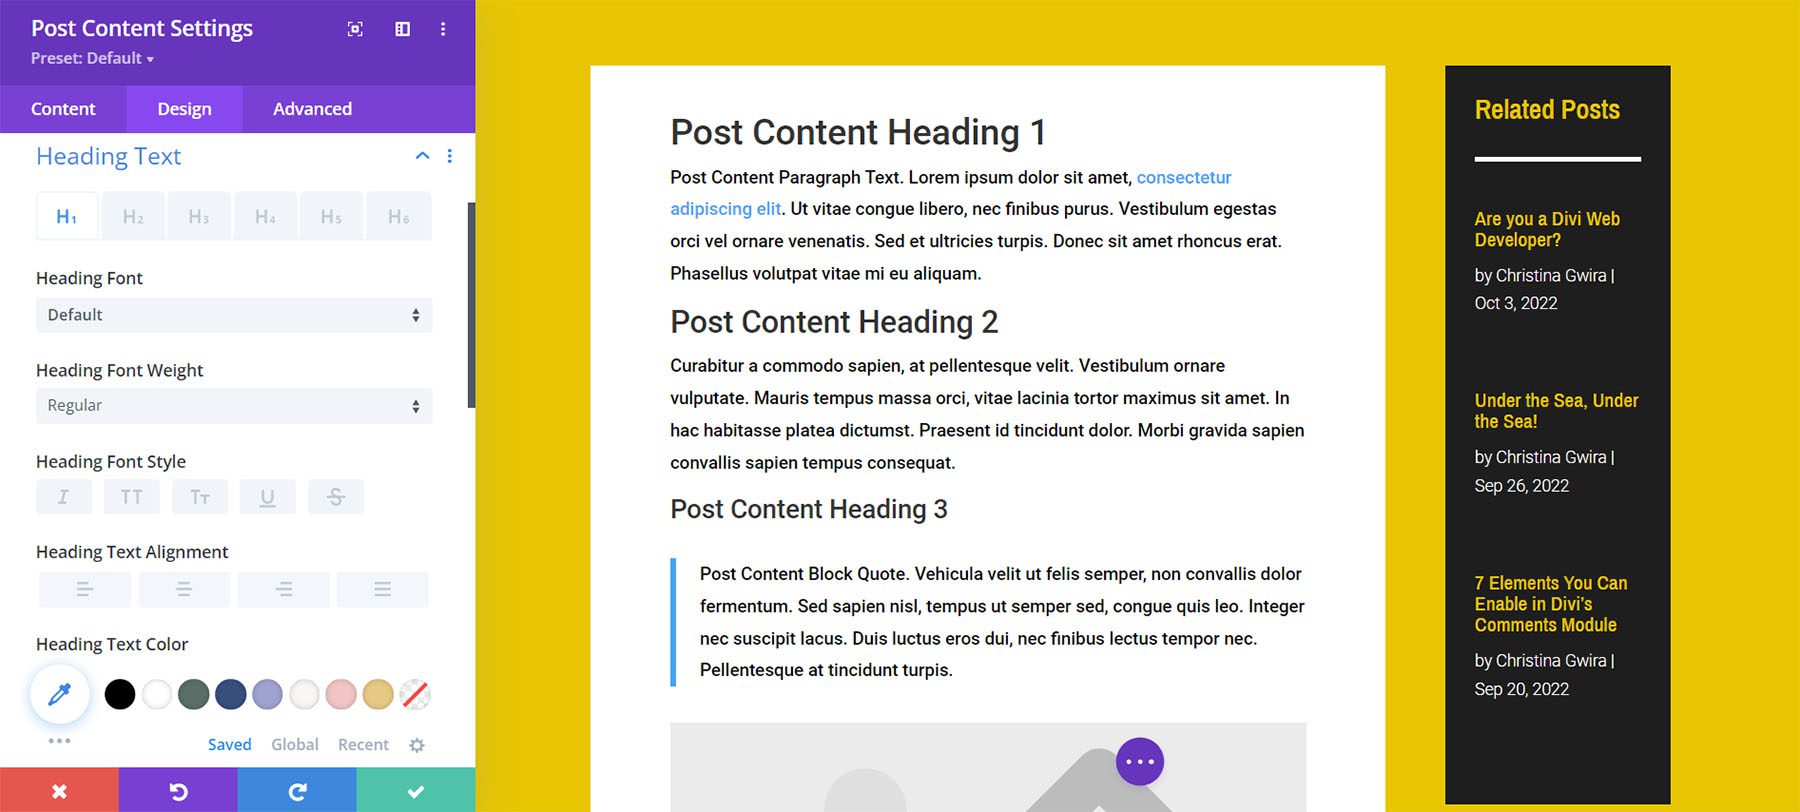 Update the Post Content to match your branding for the Divi Web Developer Blog Template